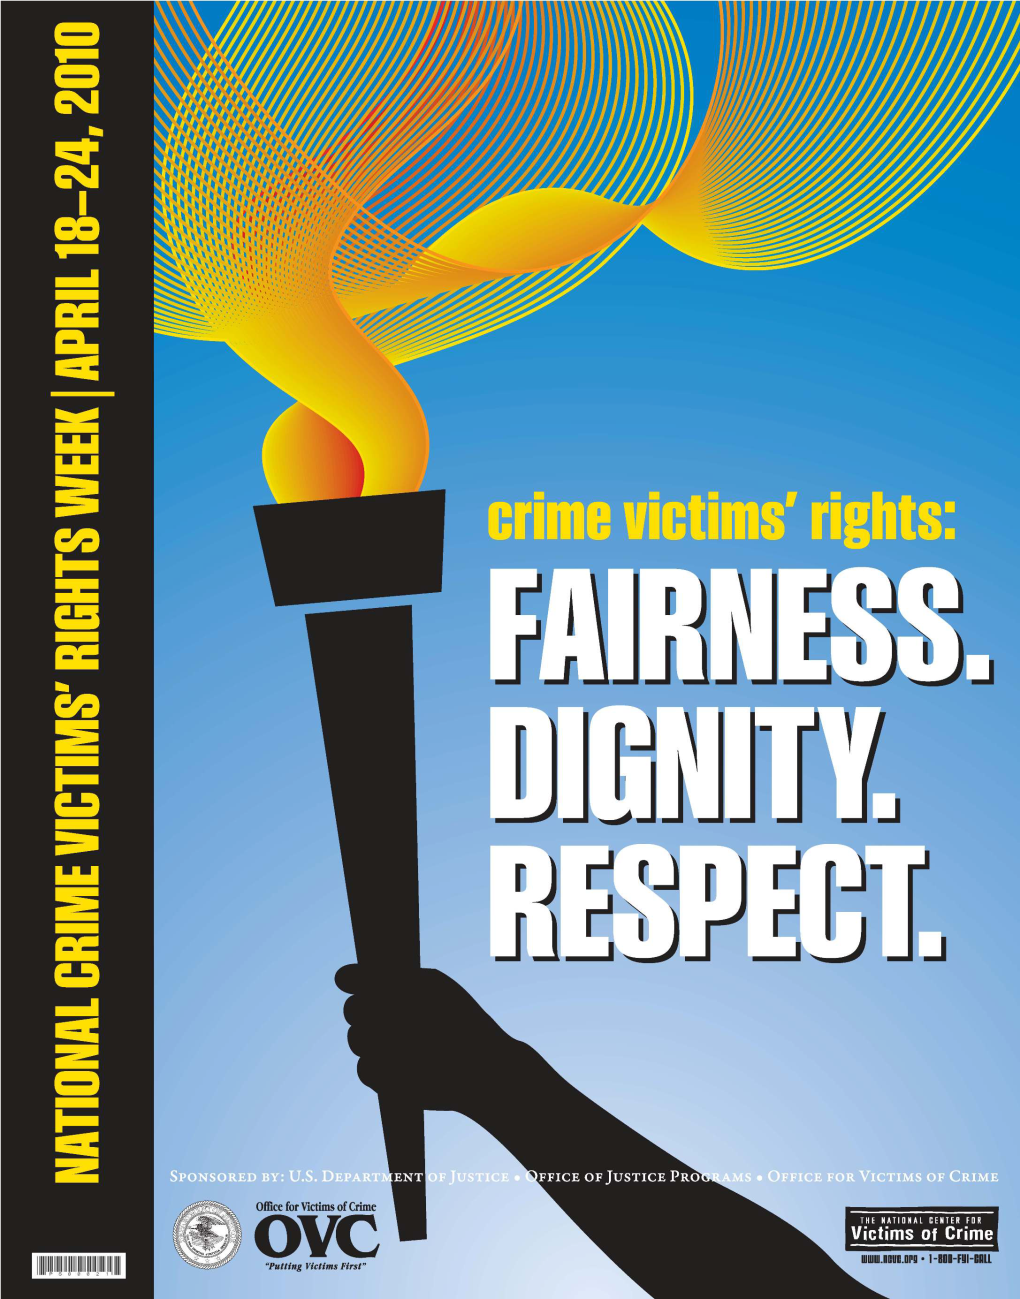 2010 National Crime Victims' Rights Week Resource Guide, Developed by the Office for Victims of Crime (OVC) and the National Center for Victims of Crime